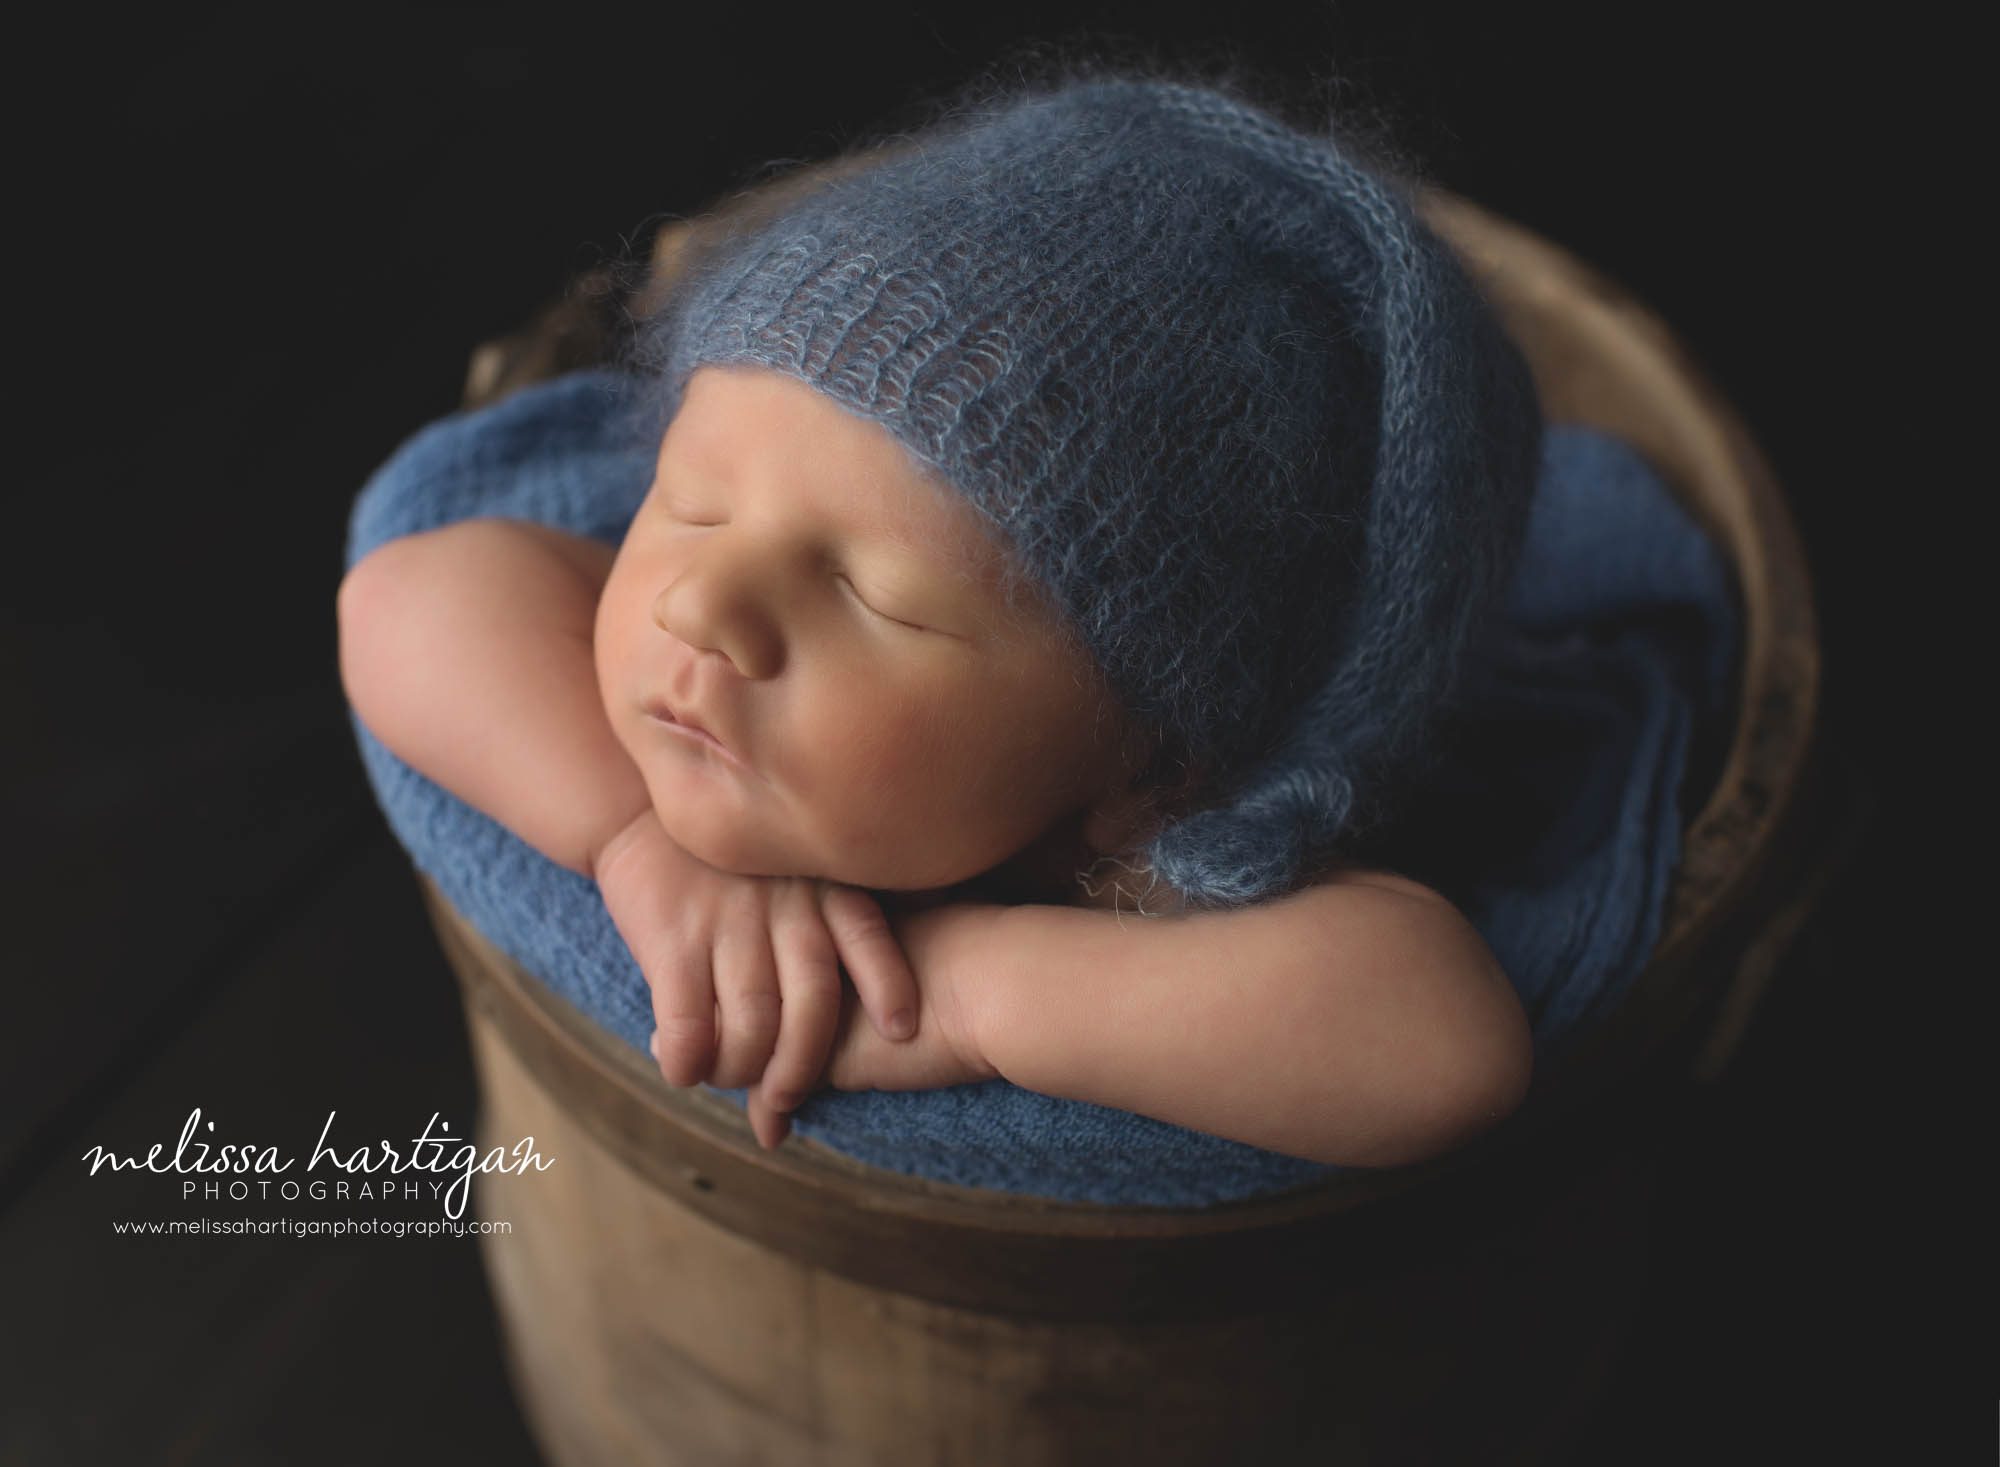 baby boy posed in wooden bucket with blue knitted sleepy cap